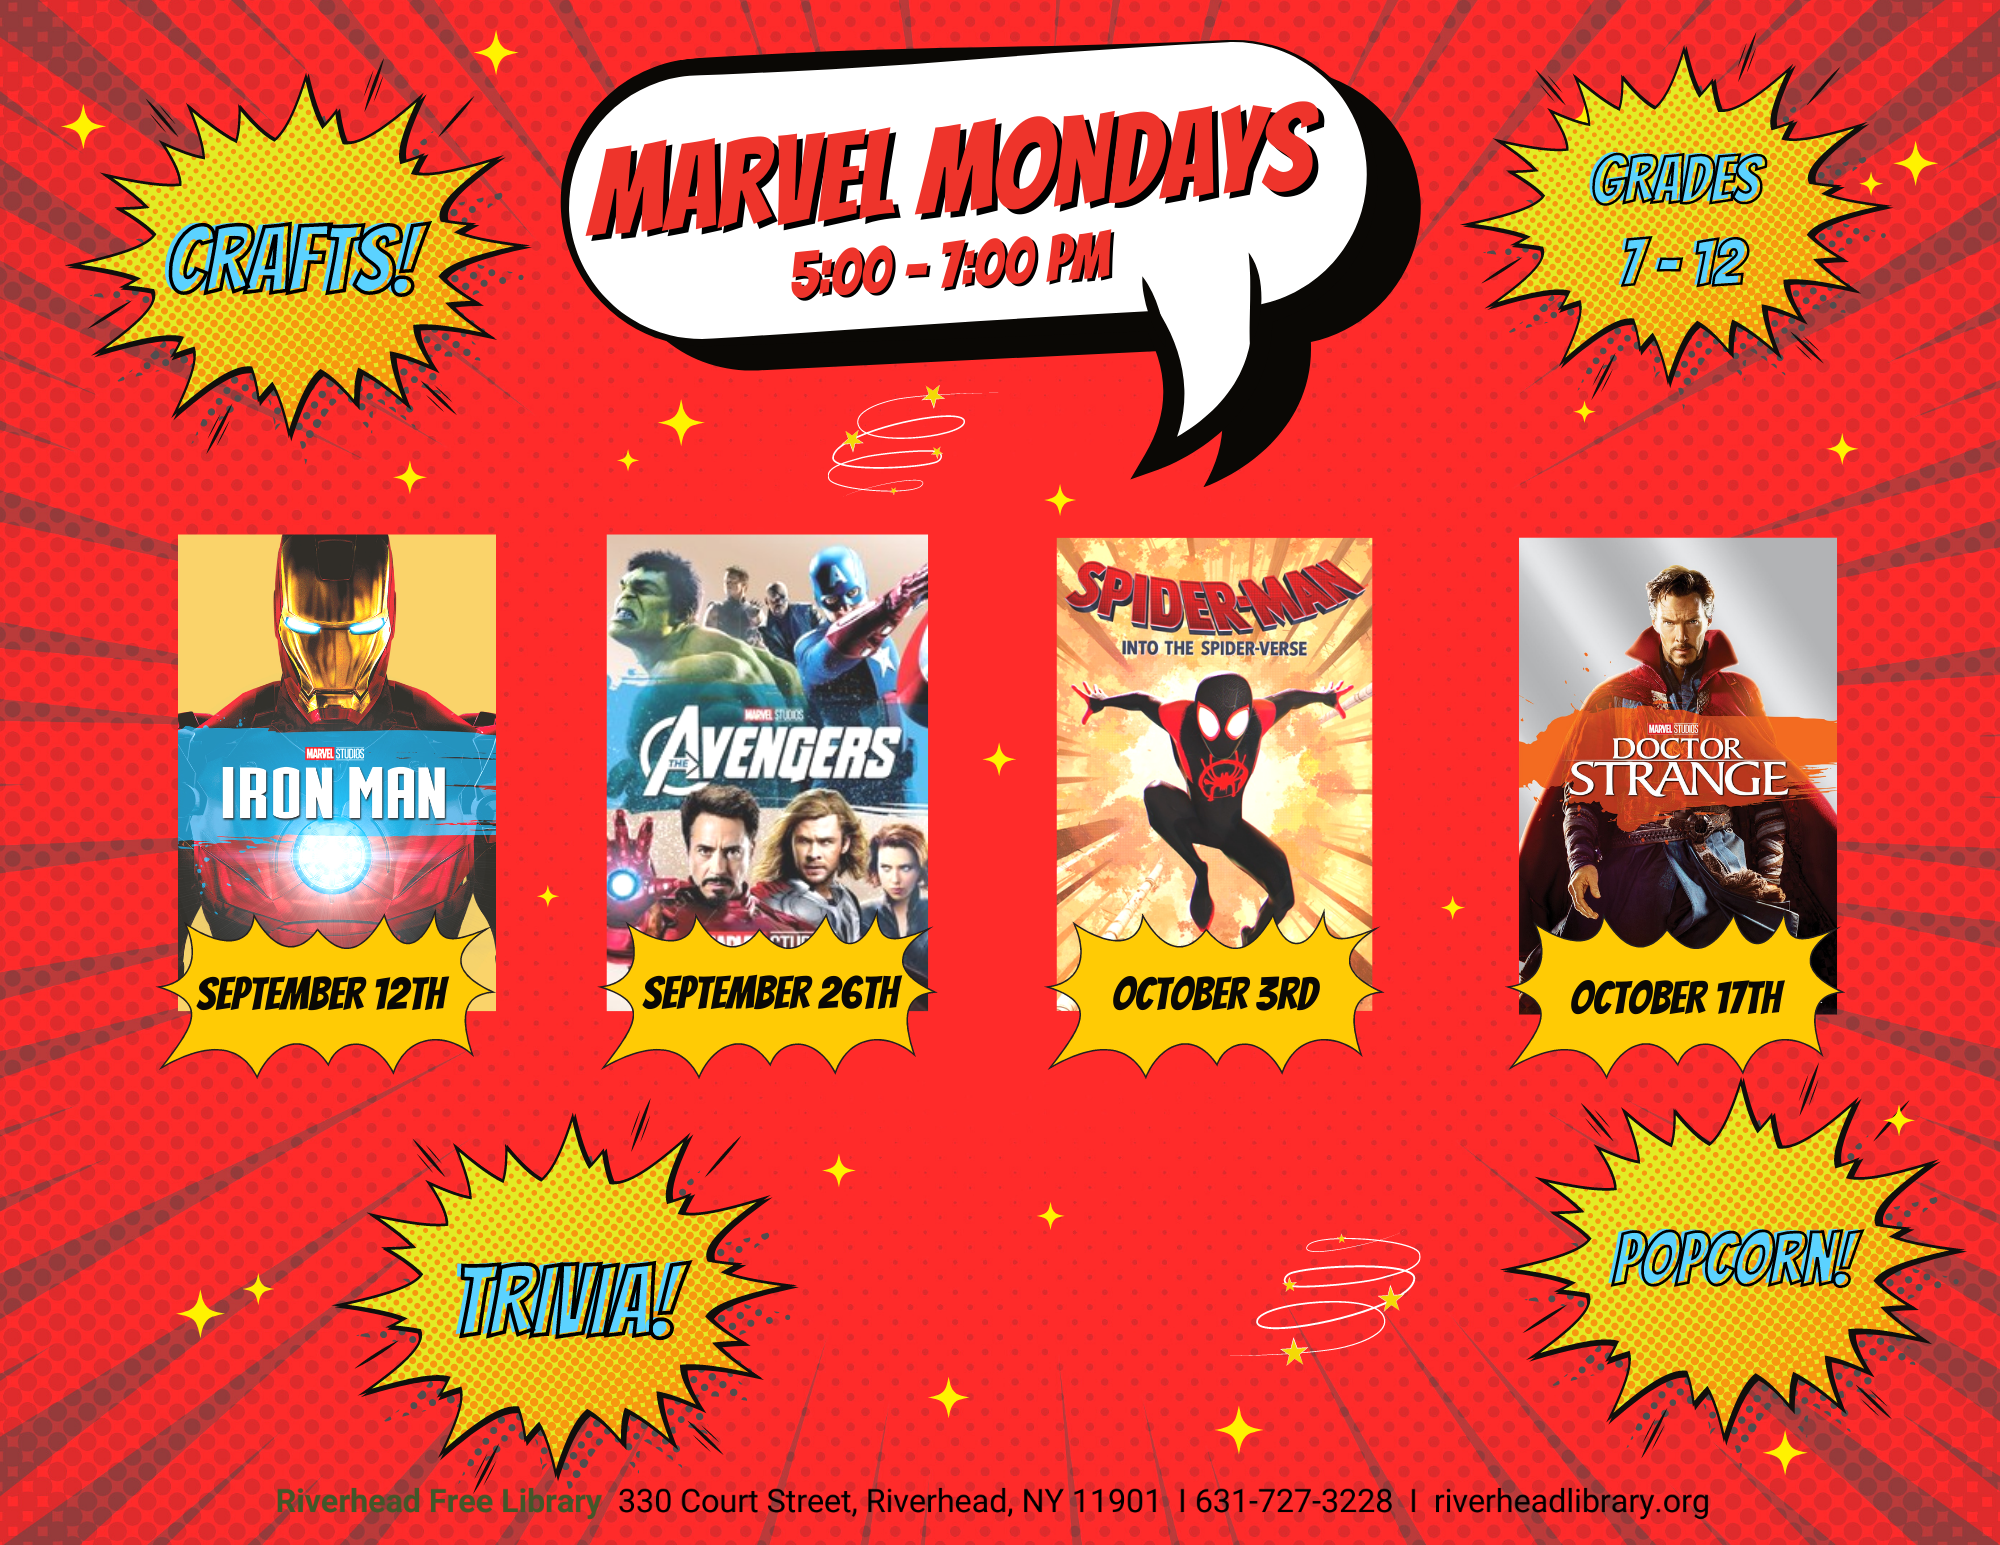 Program flyer that has the following text, "Marvel Mondays. 5:00-7:00pm. September 12th (Ironman), September 26th (The Avengers), October 3rd (Spider-Man: Into The Spiderverse), & October 17th (Doctor Strange). For grades 7-12. Will have crafts, popcorn, and trivia!"